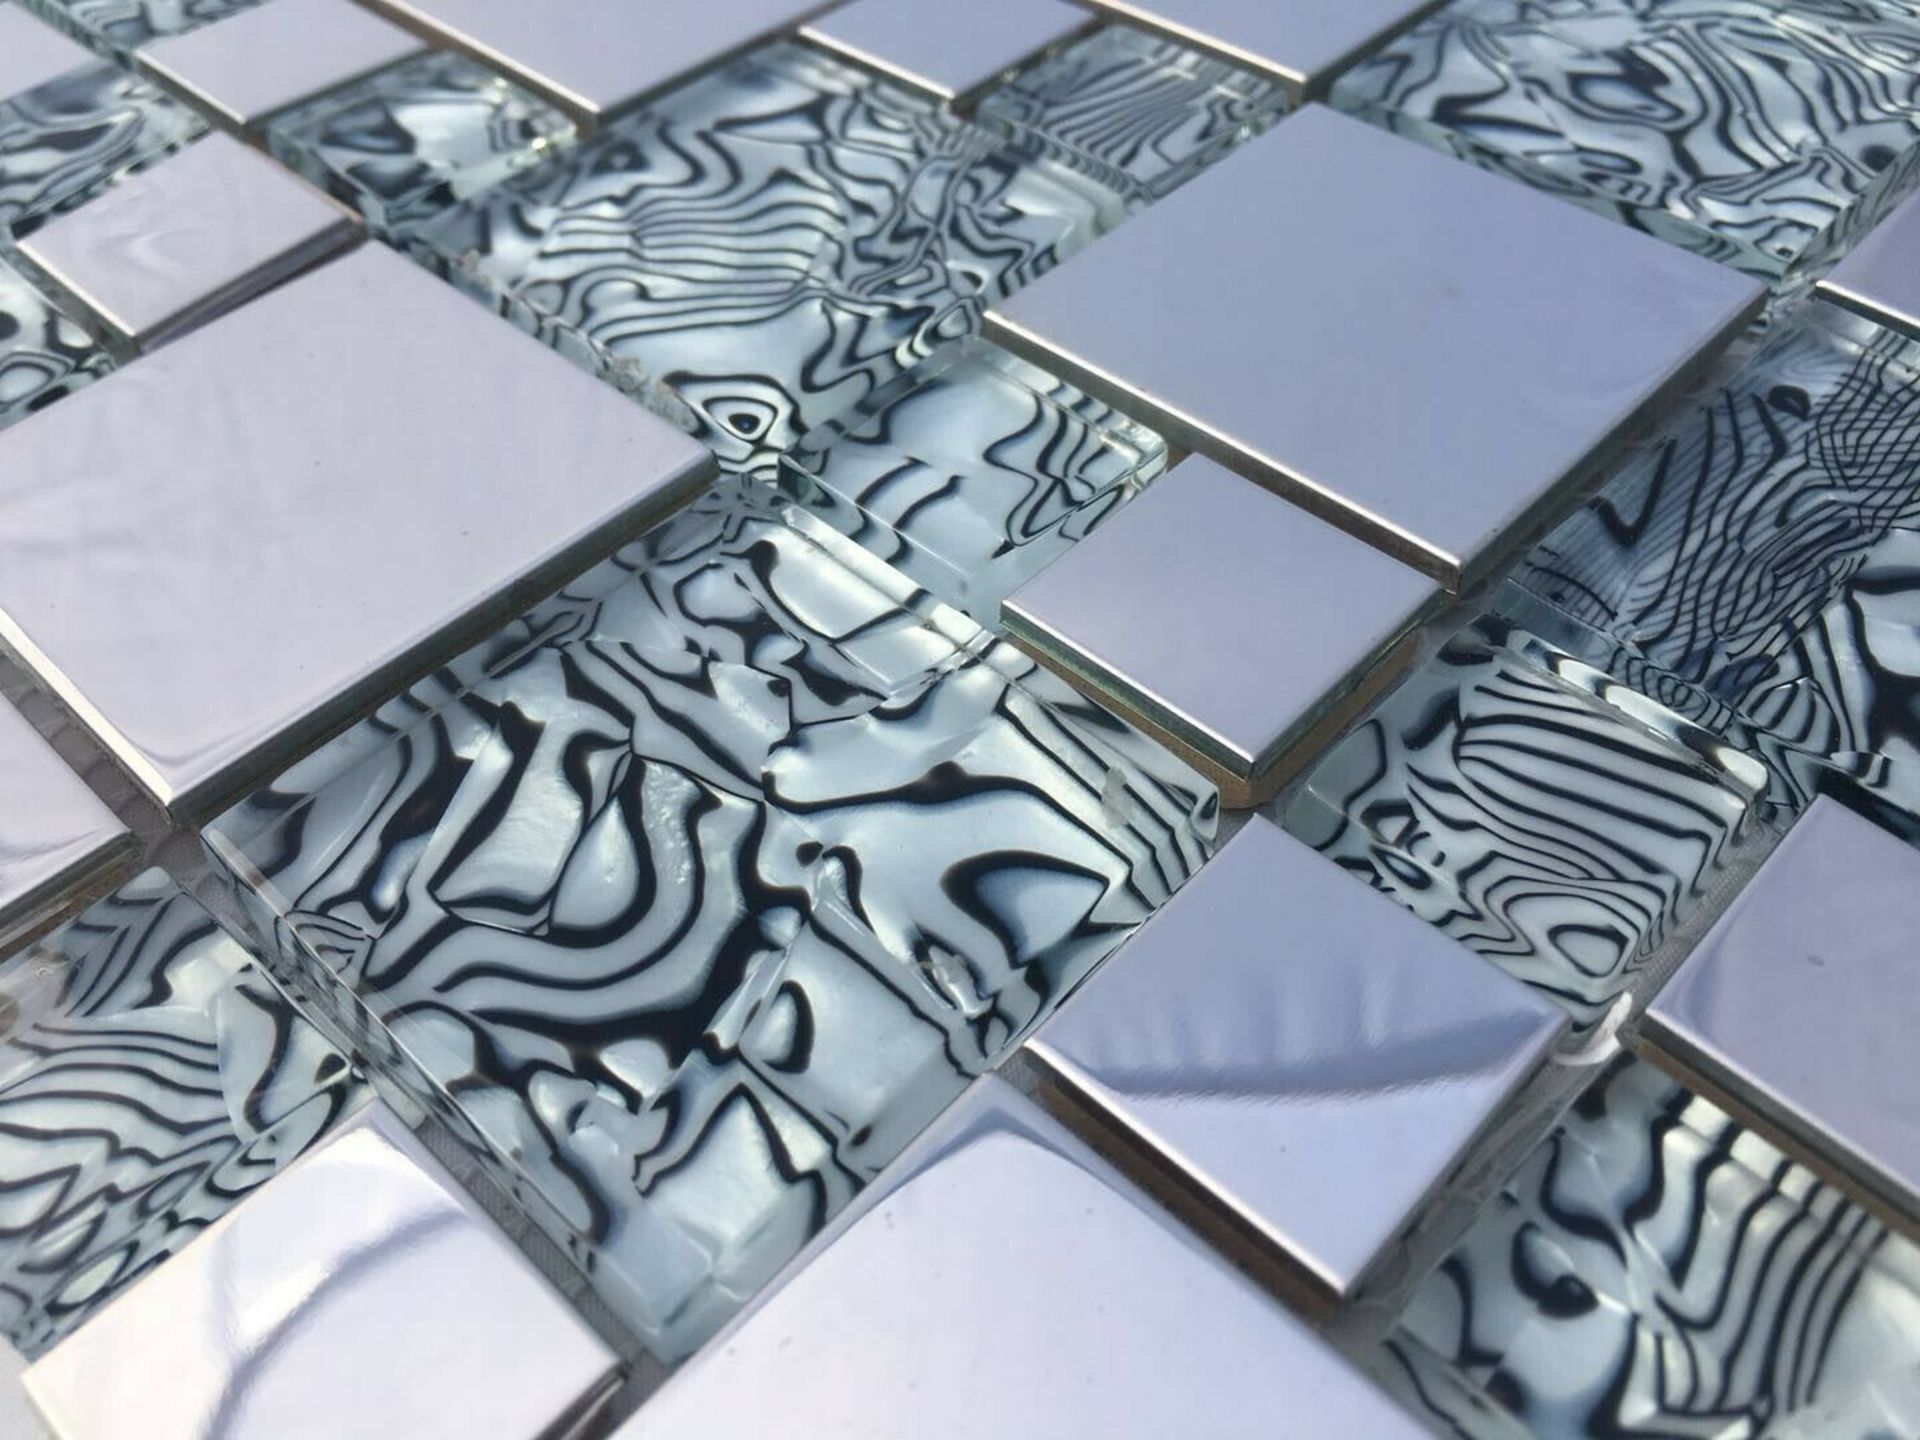 Stock Clearance High Quality Glass/Stainless Steel Mosaic Tiles - 11 Sheets - One Square Metres - Image 2 of 3